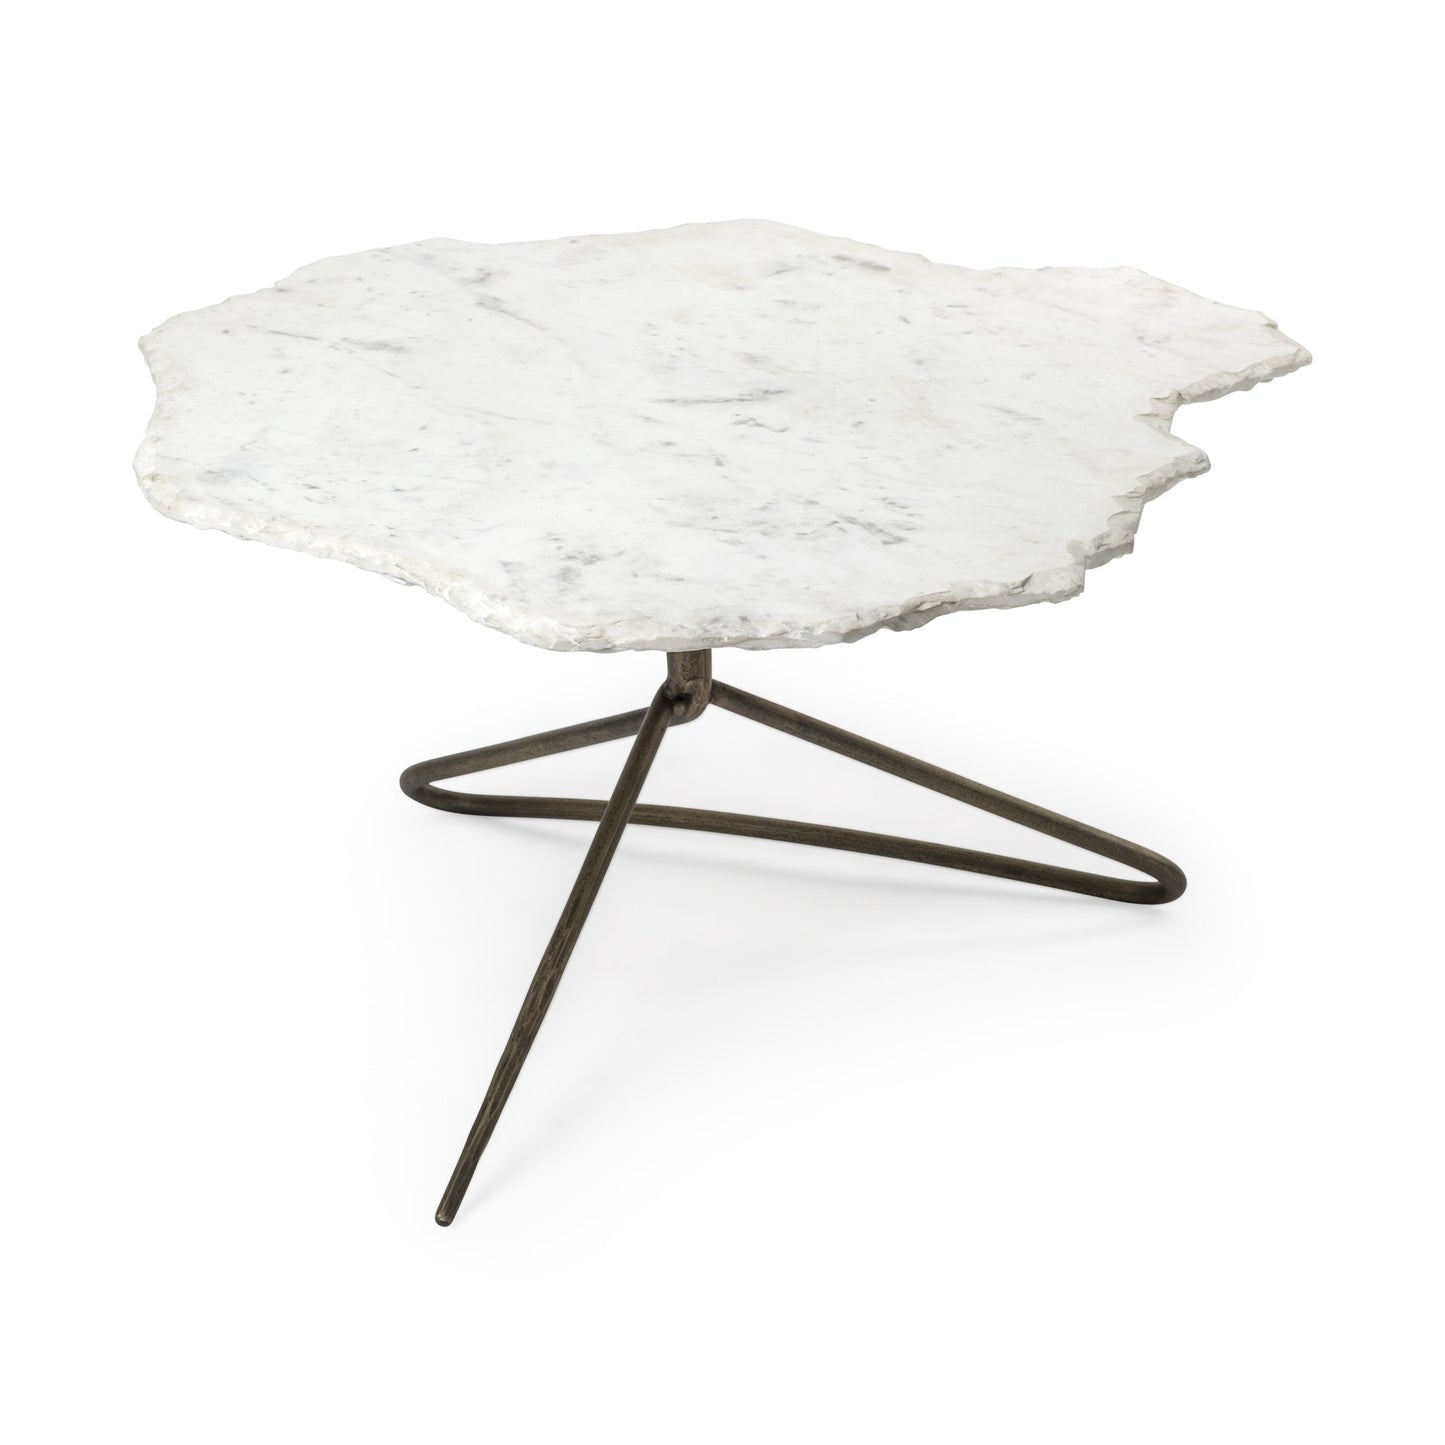 33" White And Gold Genuine Marble And Iron Free Form Coffee Table